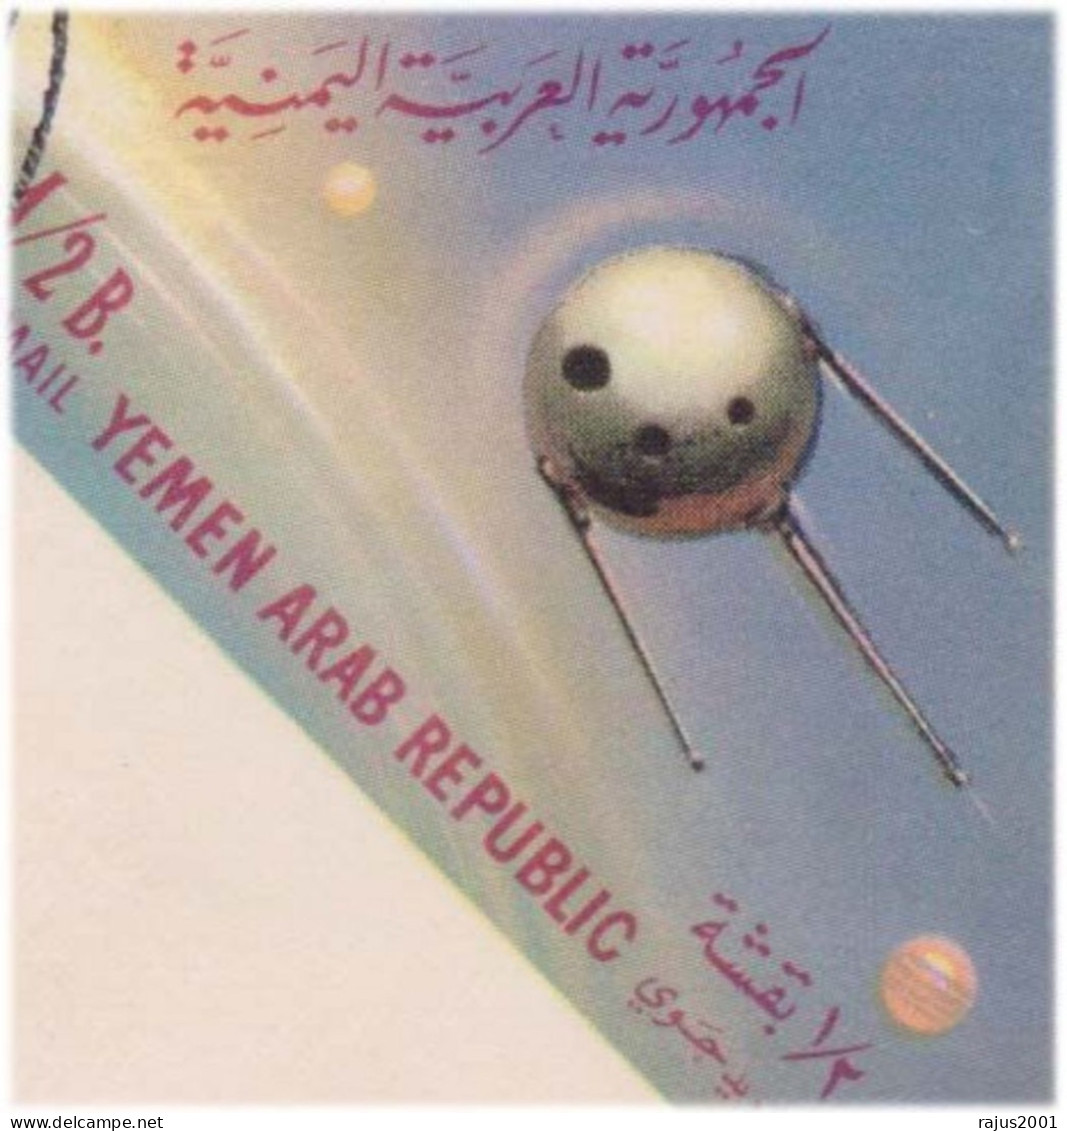 Honouring Astronauts, Exploration, SPUTNIK World First Man Made Space Satellite, Science, Astronomy IMPERF YEMEN FDC - Astronomie